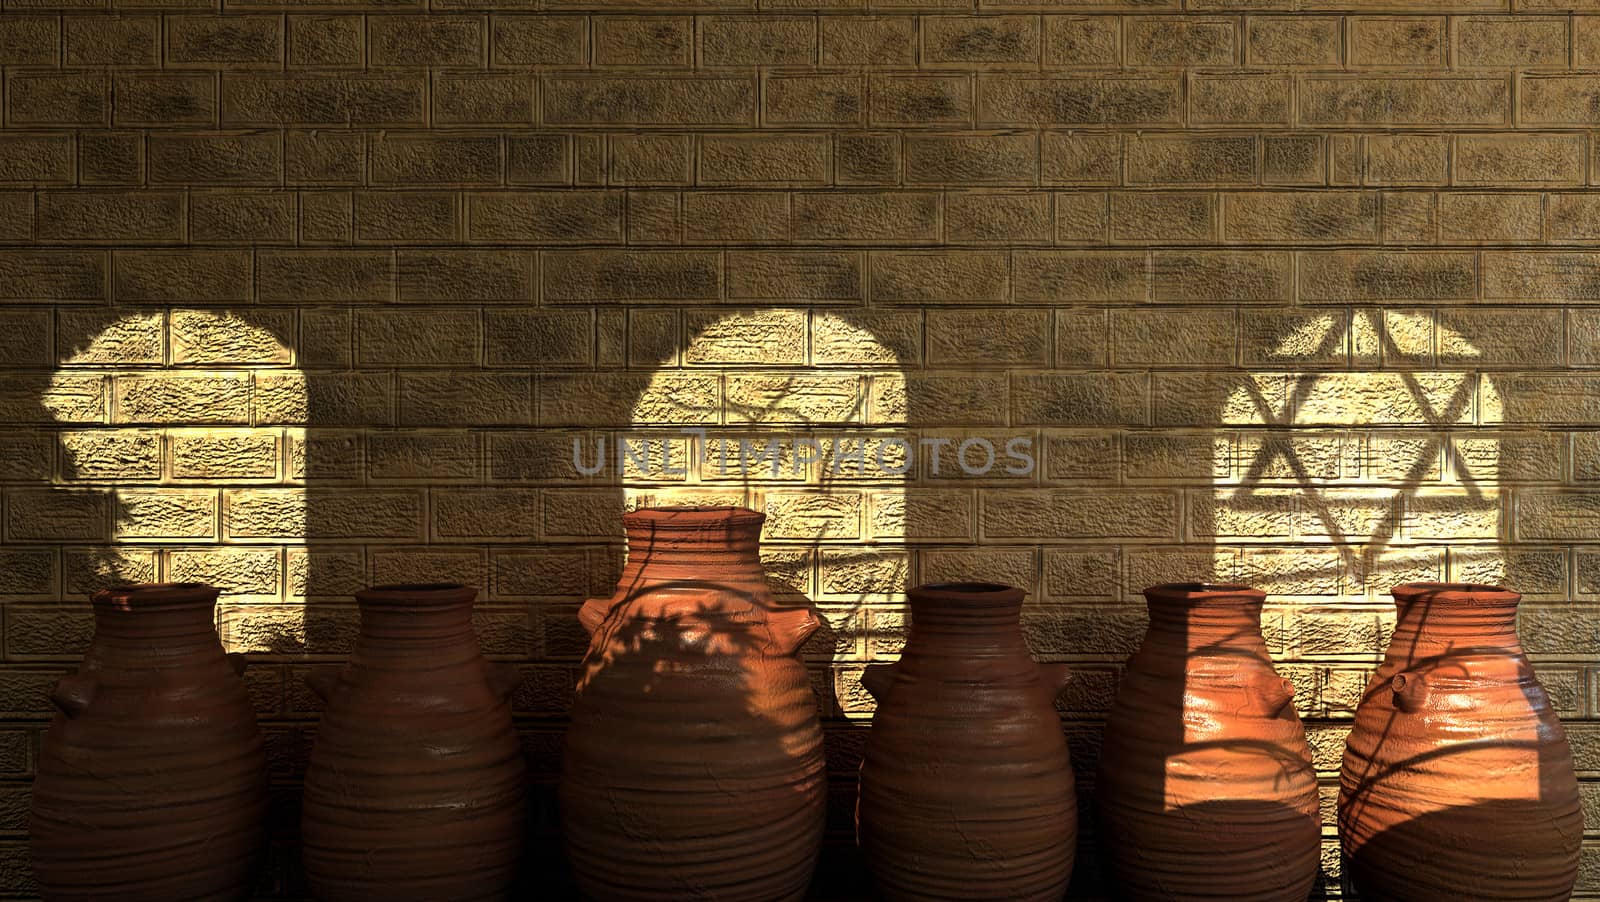 ancient stone wall with shadows, pitchers and religions symbols by denisgo